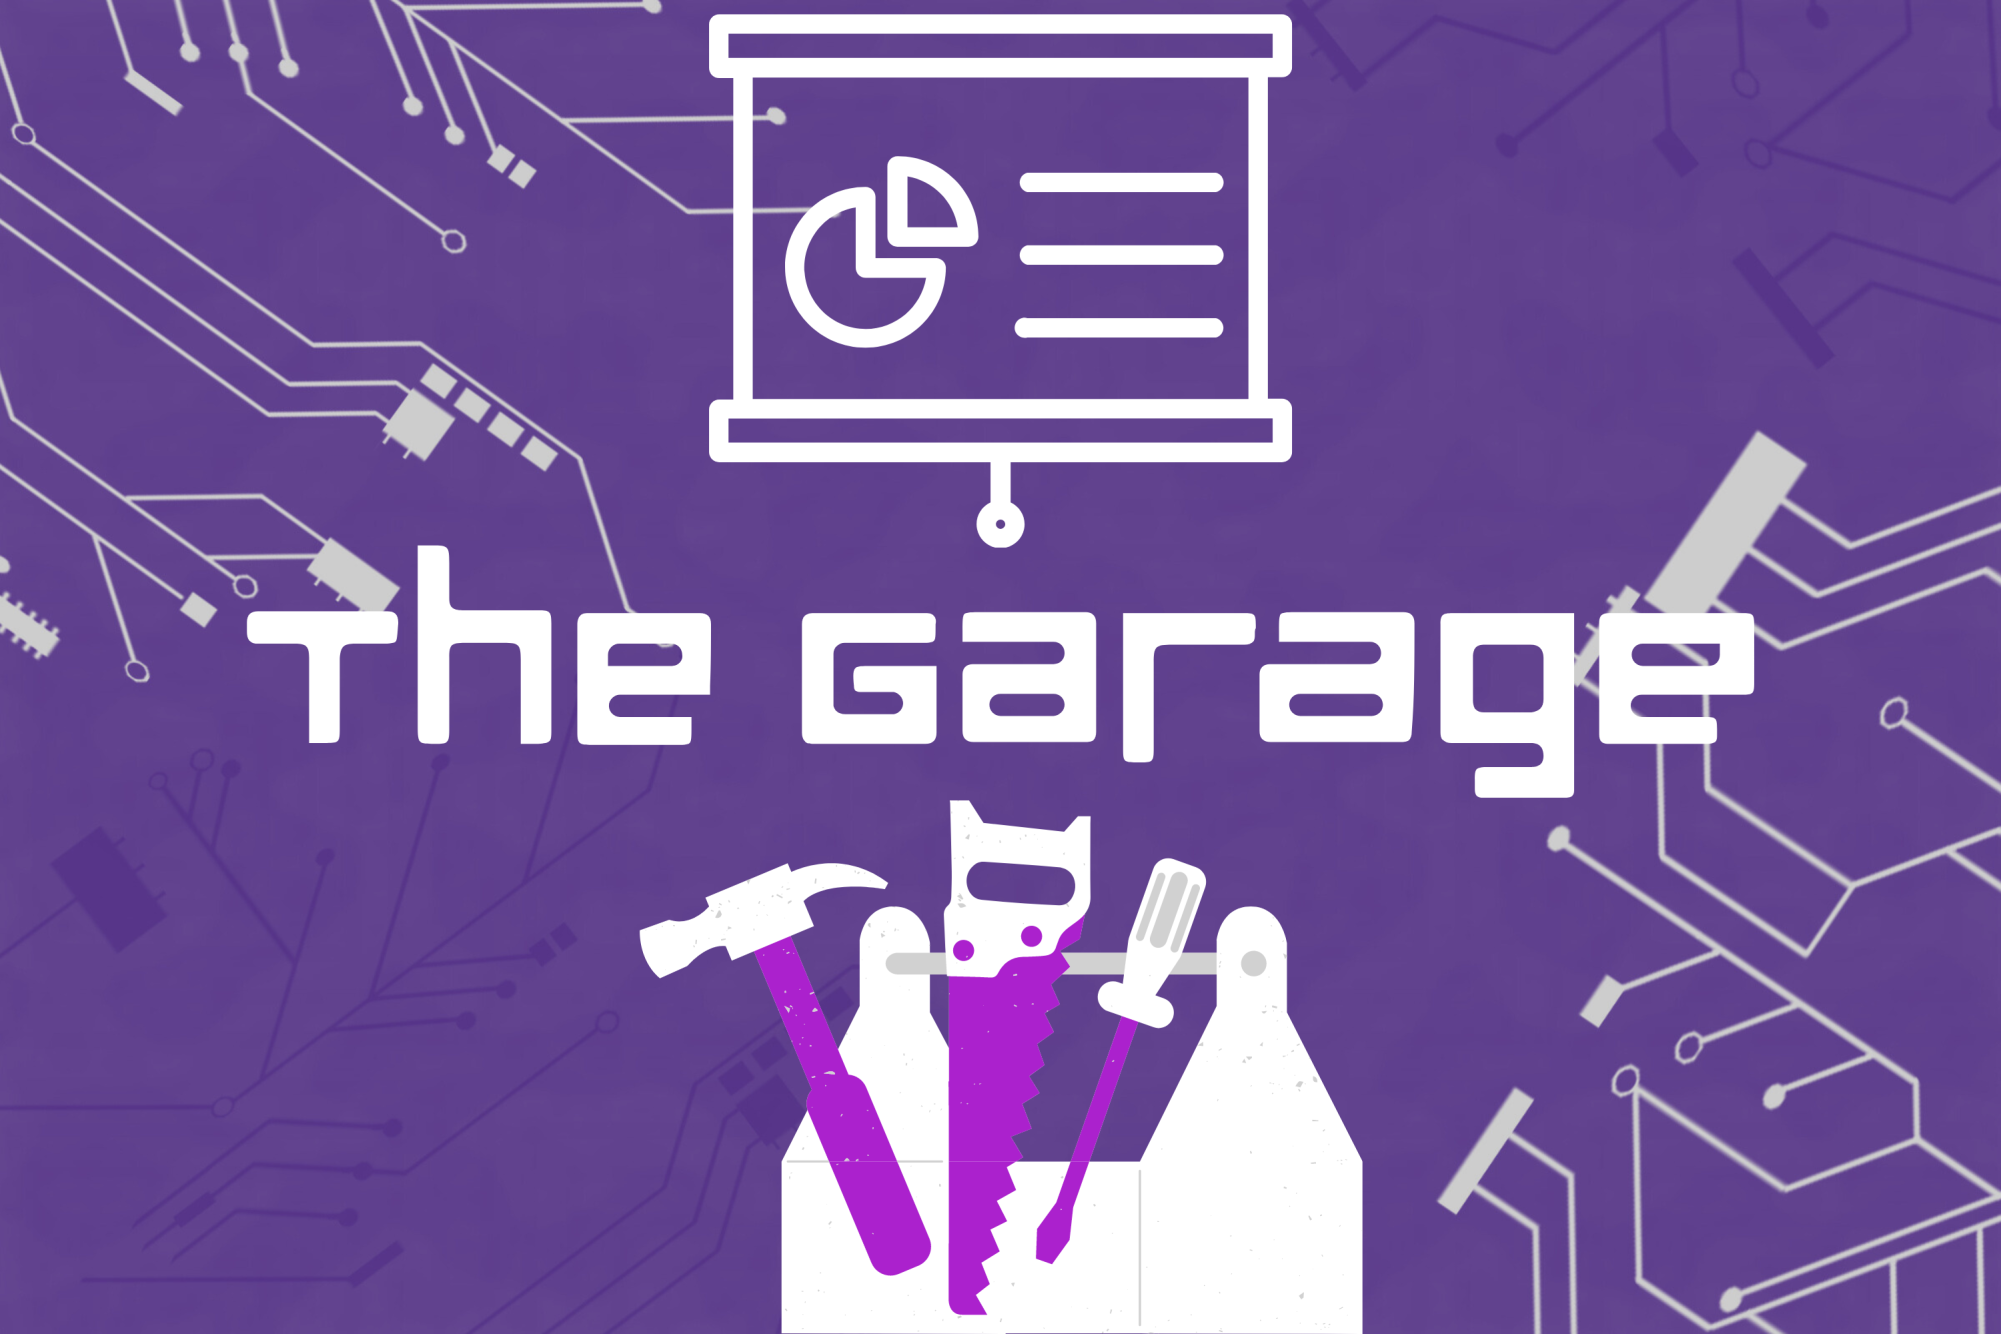 Since The Garage started, it’s had over 1,000 student startups under its umbrella. 